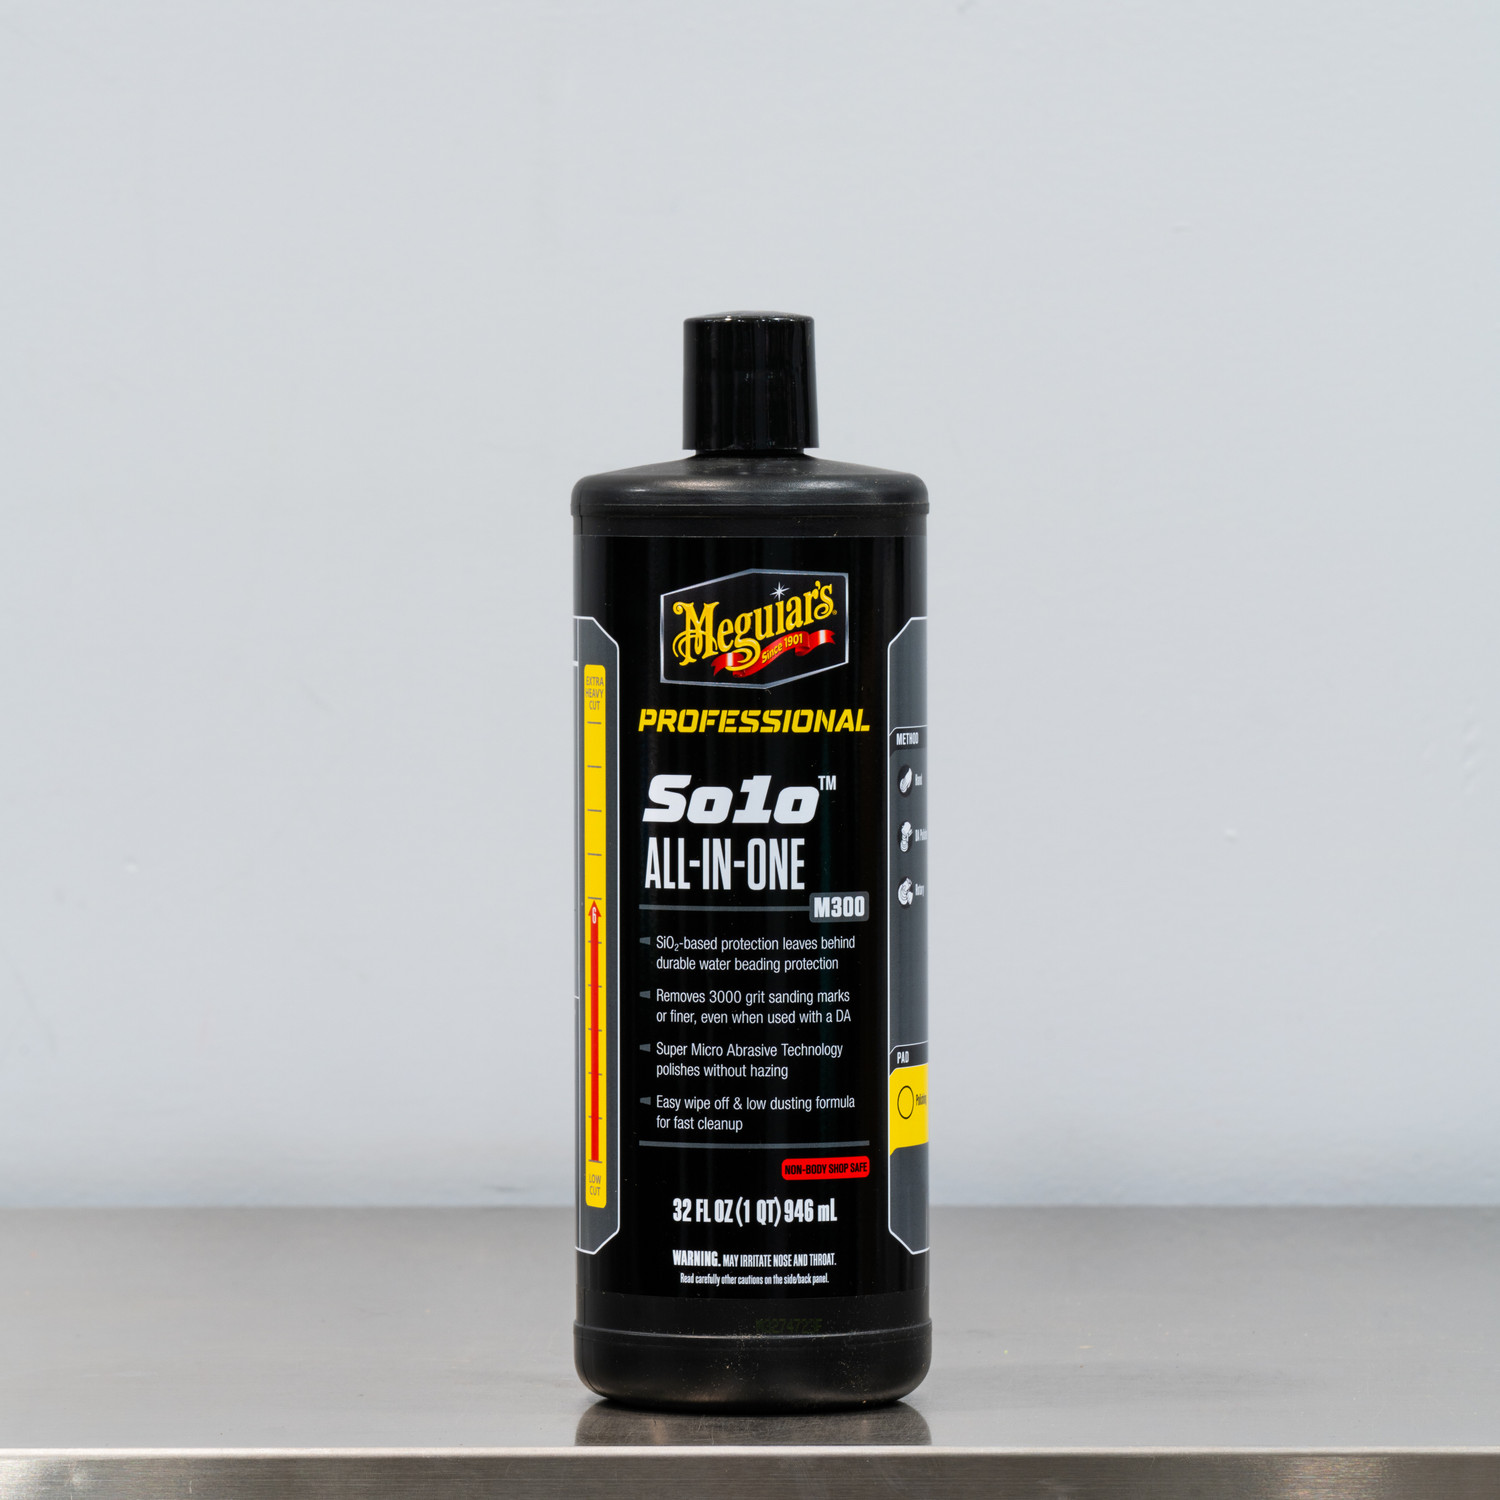 Meguiar's - For that extra gloss and depth before you wax - Ultimate Polish.  Bring out the true depth and richness in your paint, especially on darker  colors, with this easy to